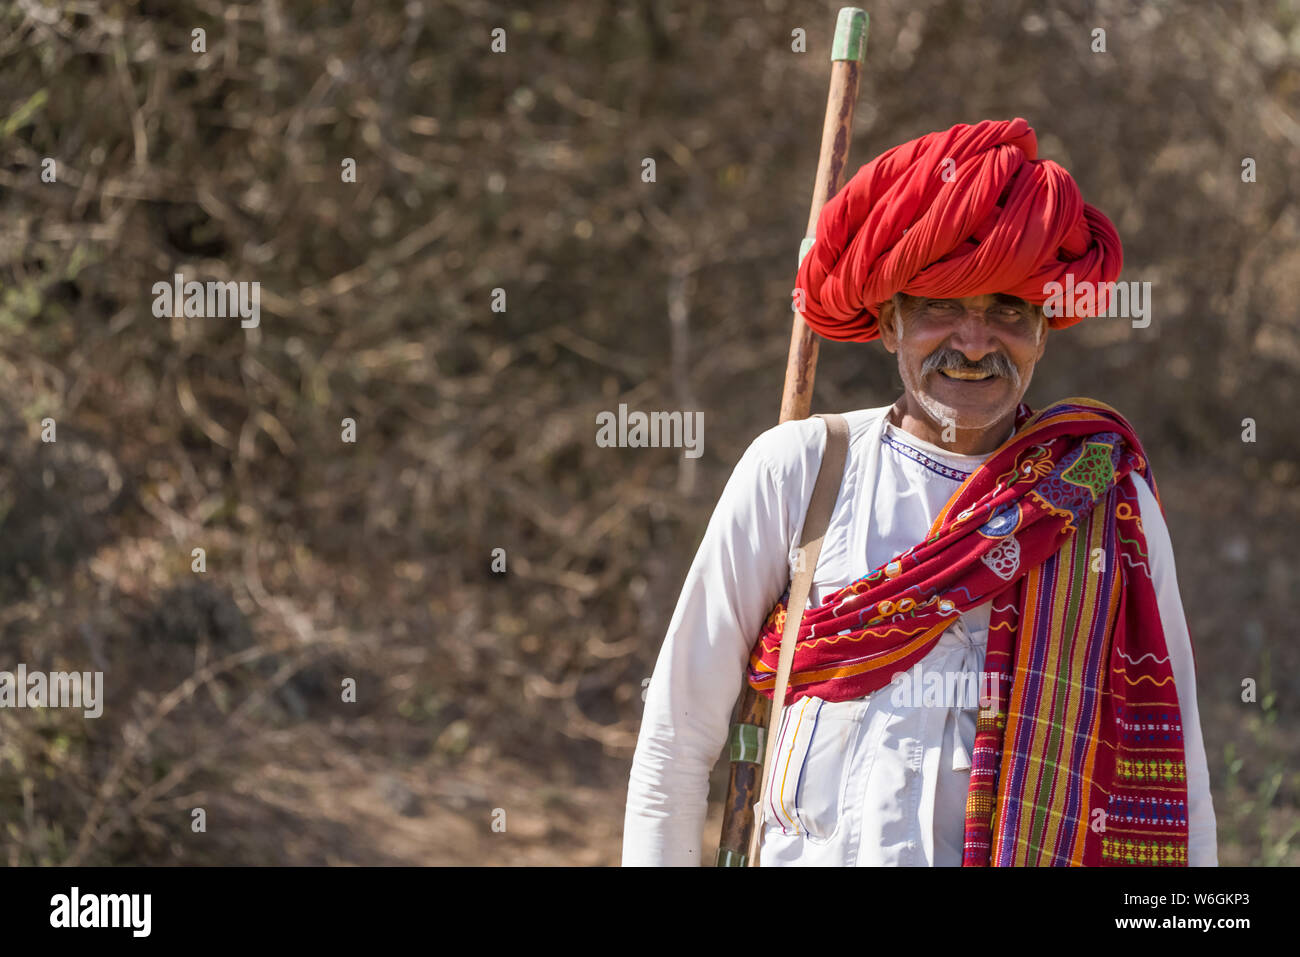 The traditional headwear and clothing by the men in the Jawai region of Northern India; Rajasthan, India Stock Photo